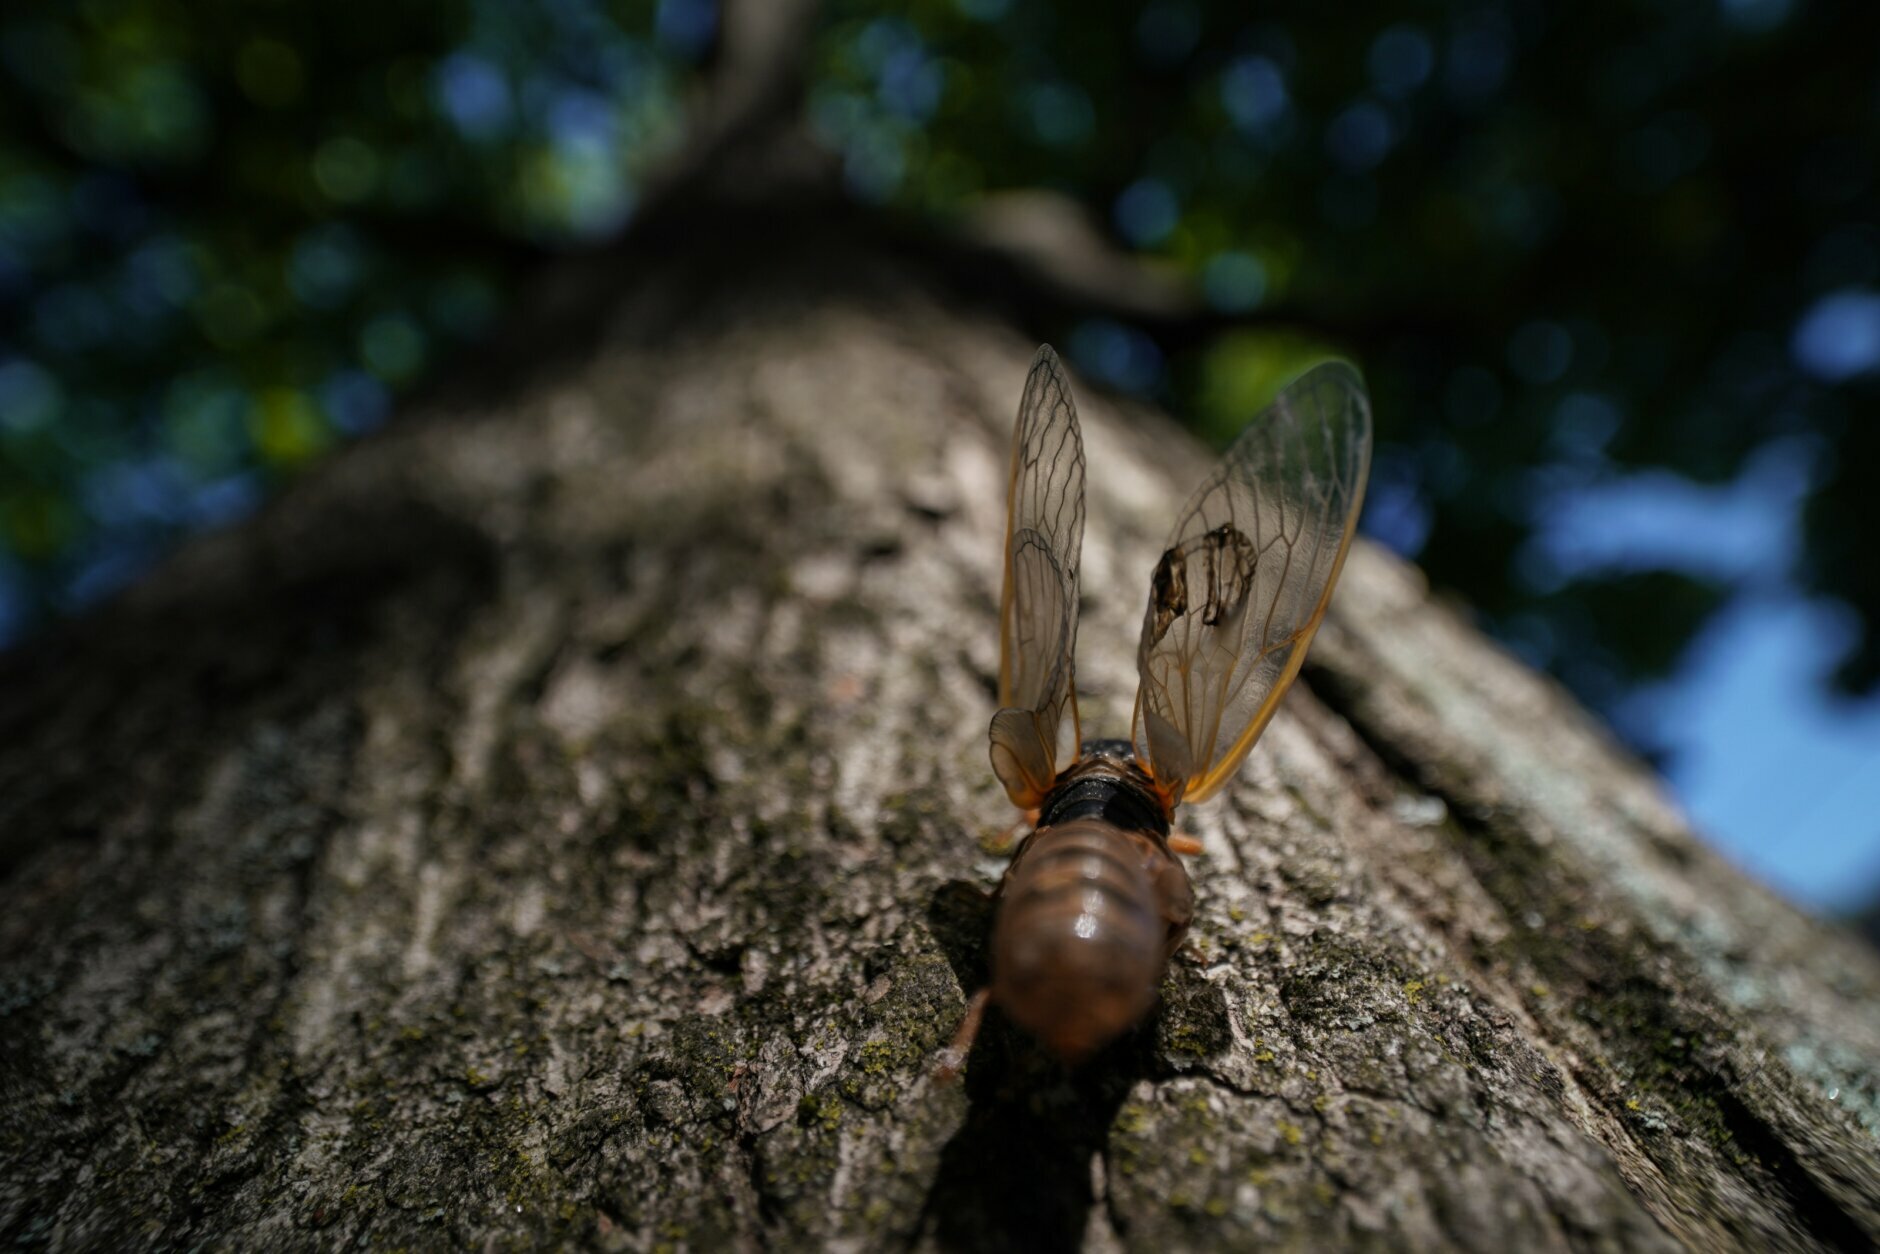 A cicada that failed to completely shed its nymph shell spreads its wings on a the base of a tree in Chevy Chase, Md., Monday, May 10, 2021. (AP Photo/Carolyn Kaster)